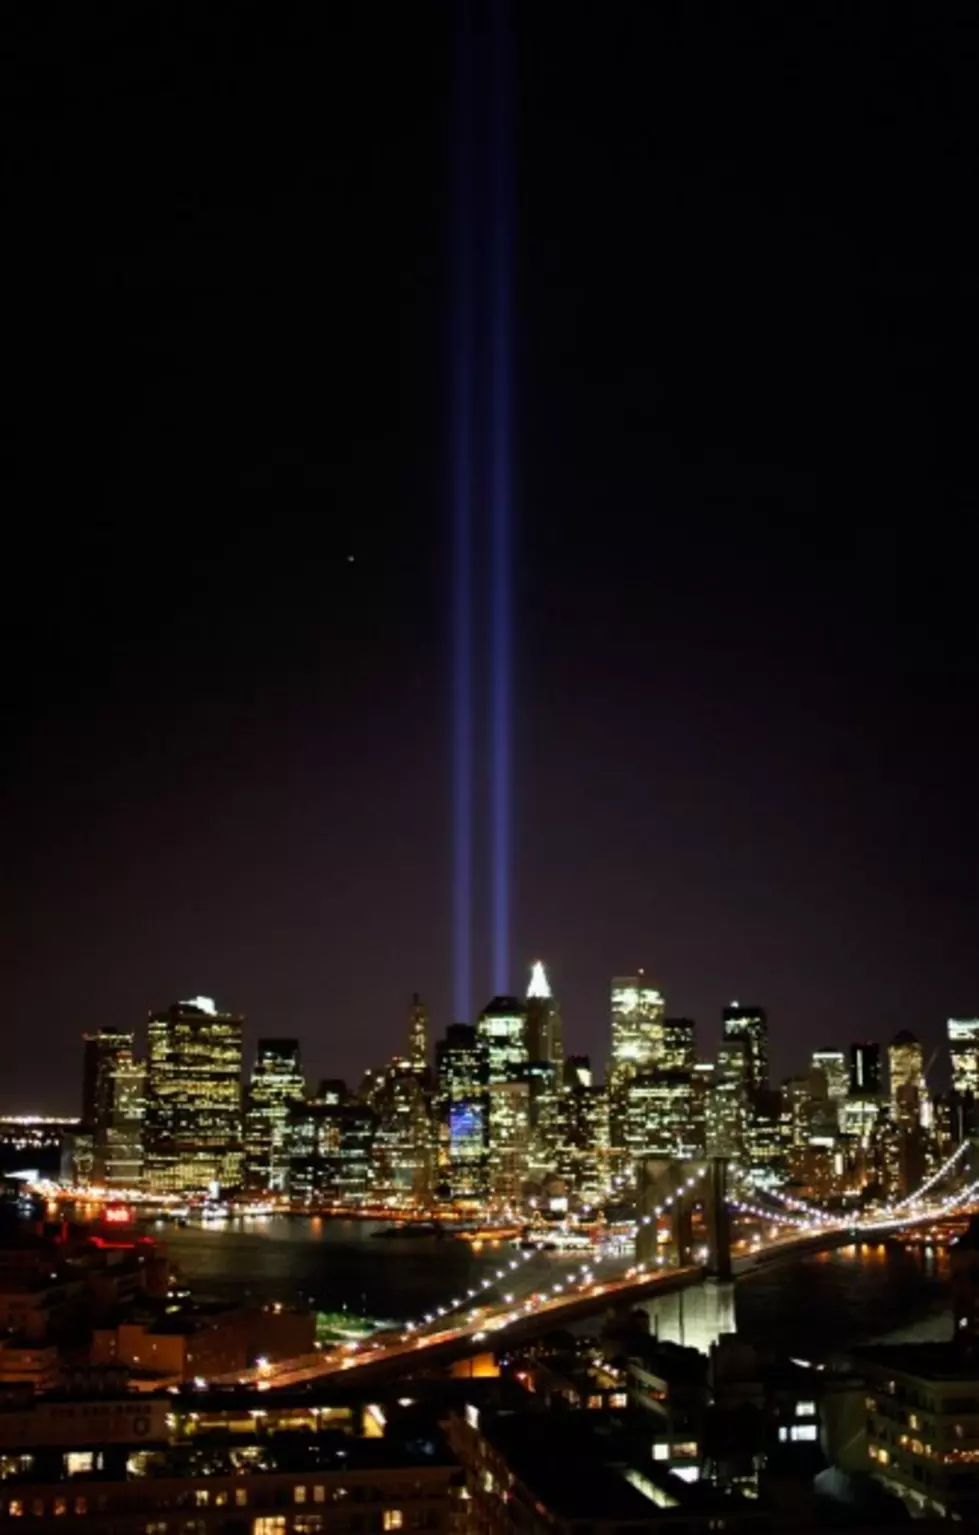 Events Planned For The 13th Anniversary of 9/11